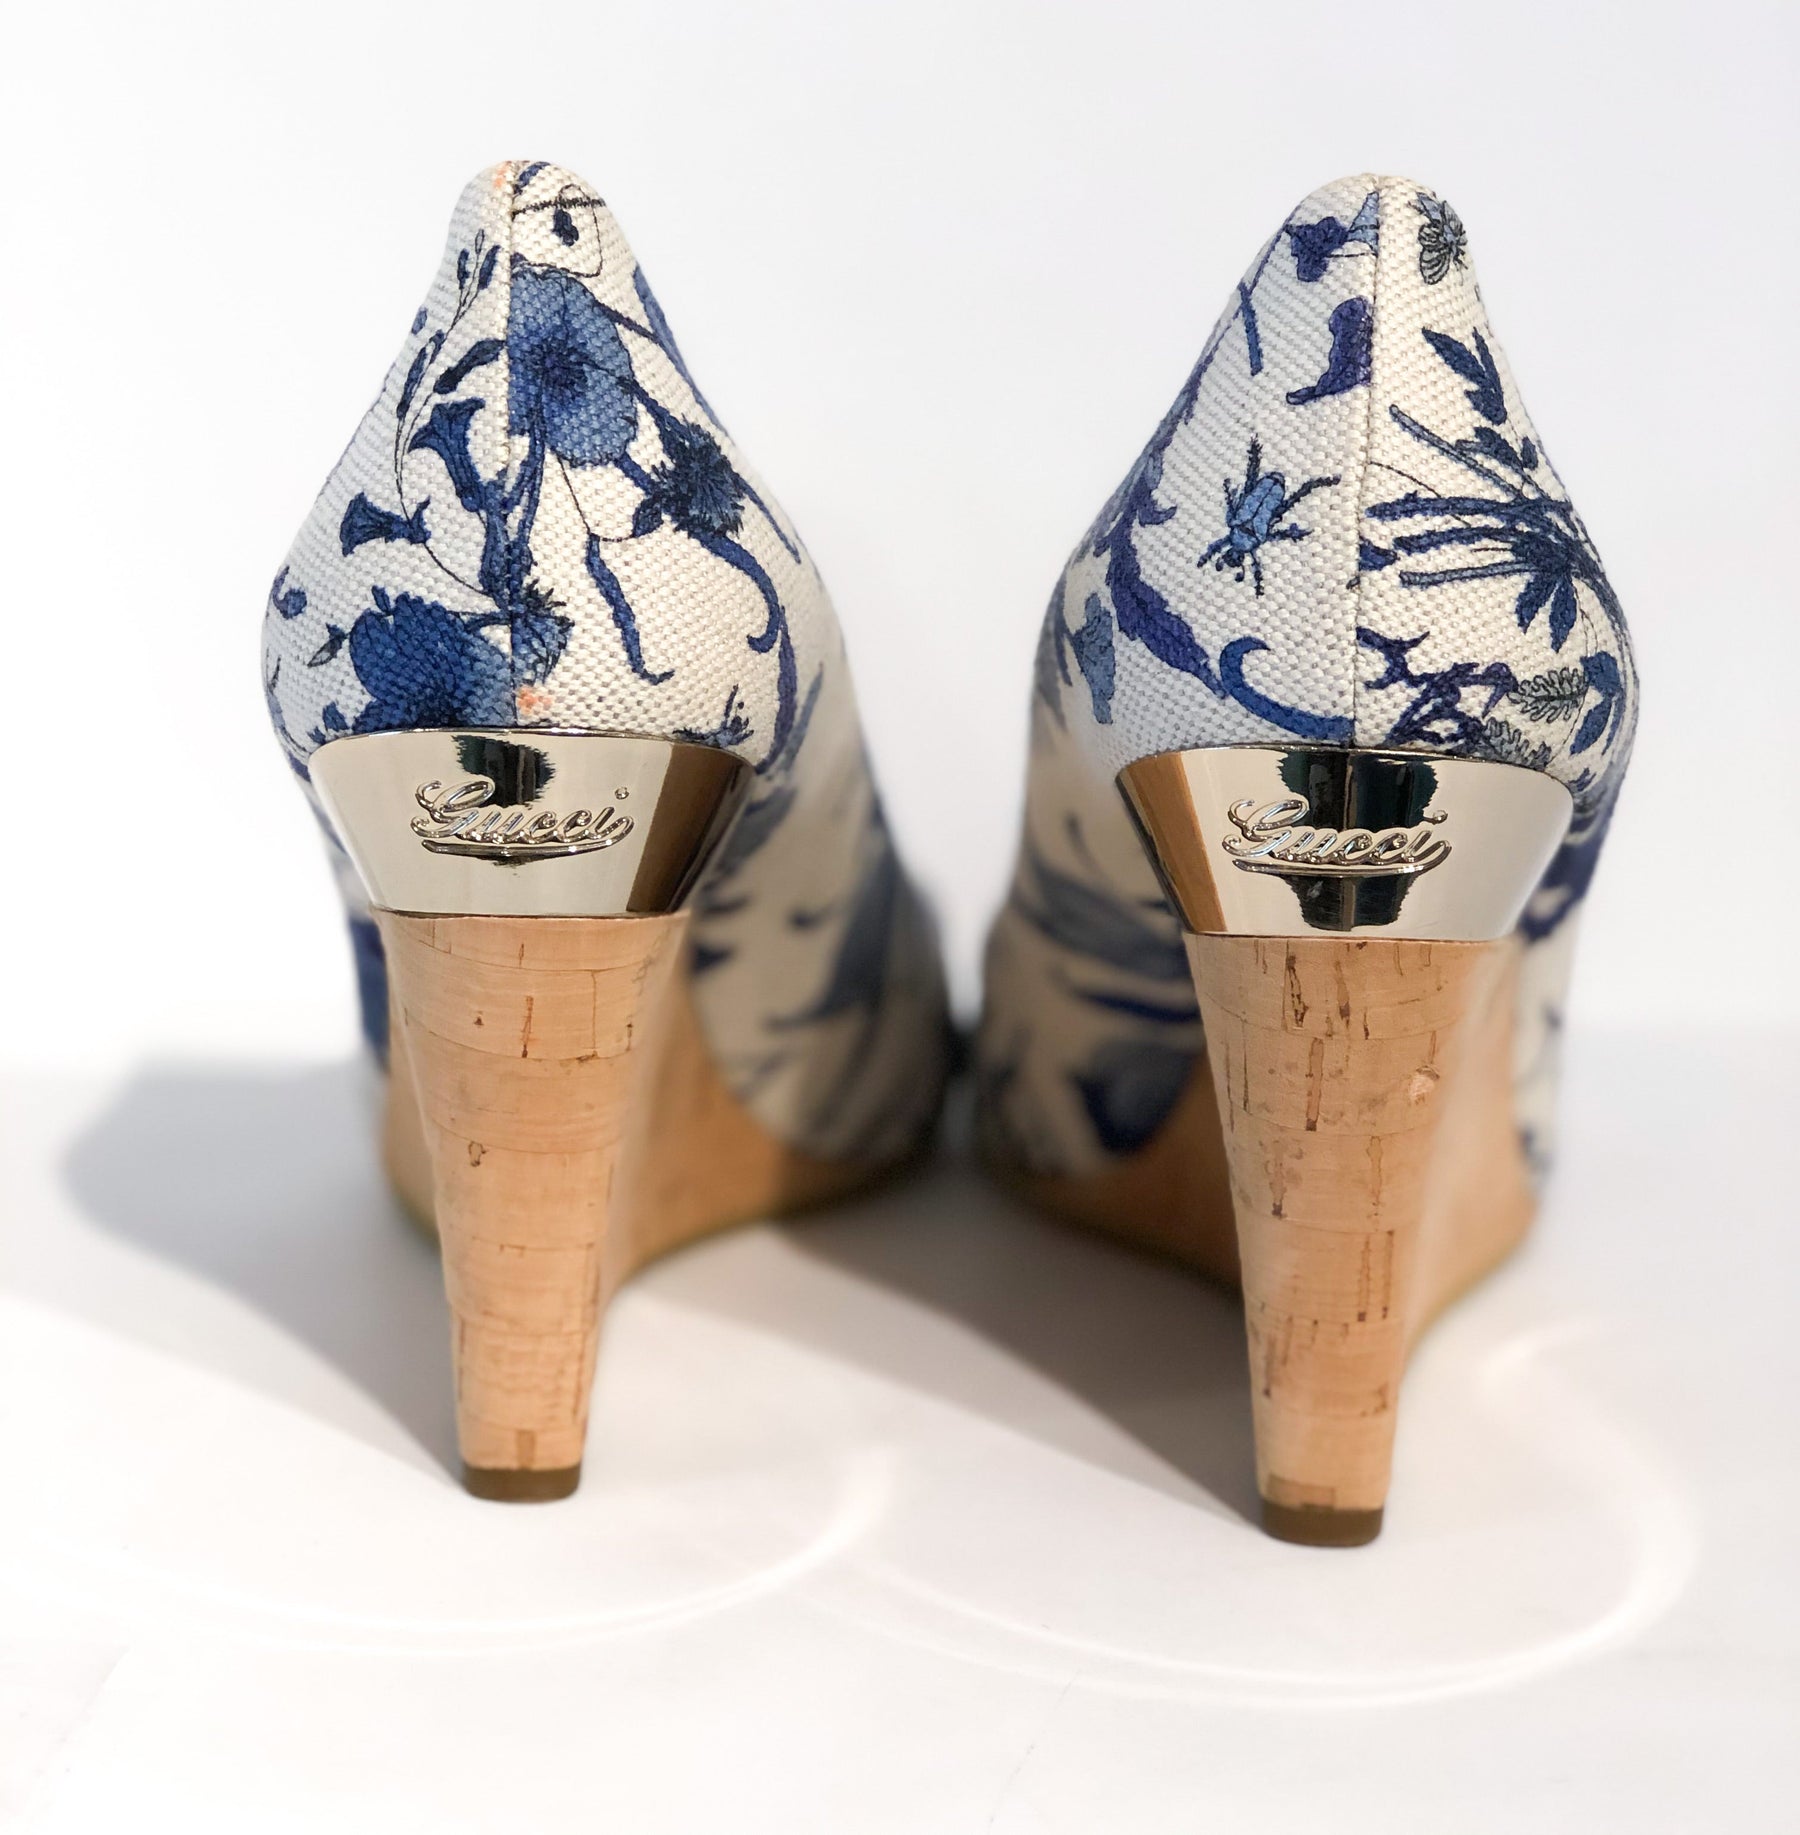 Gucci Floral Wedges Blue and White Back of Shoes